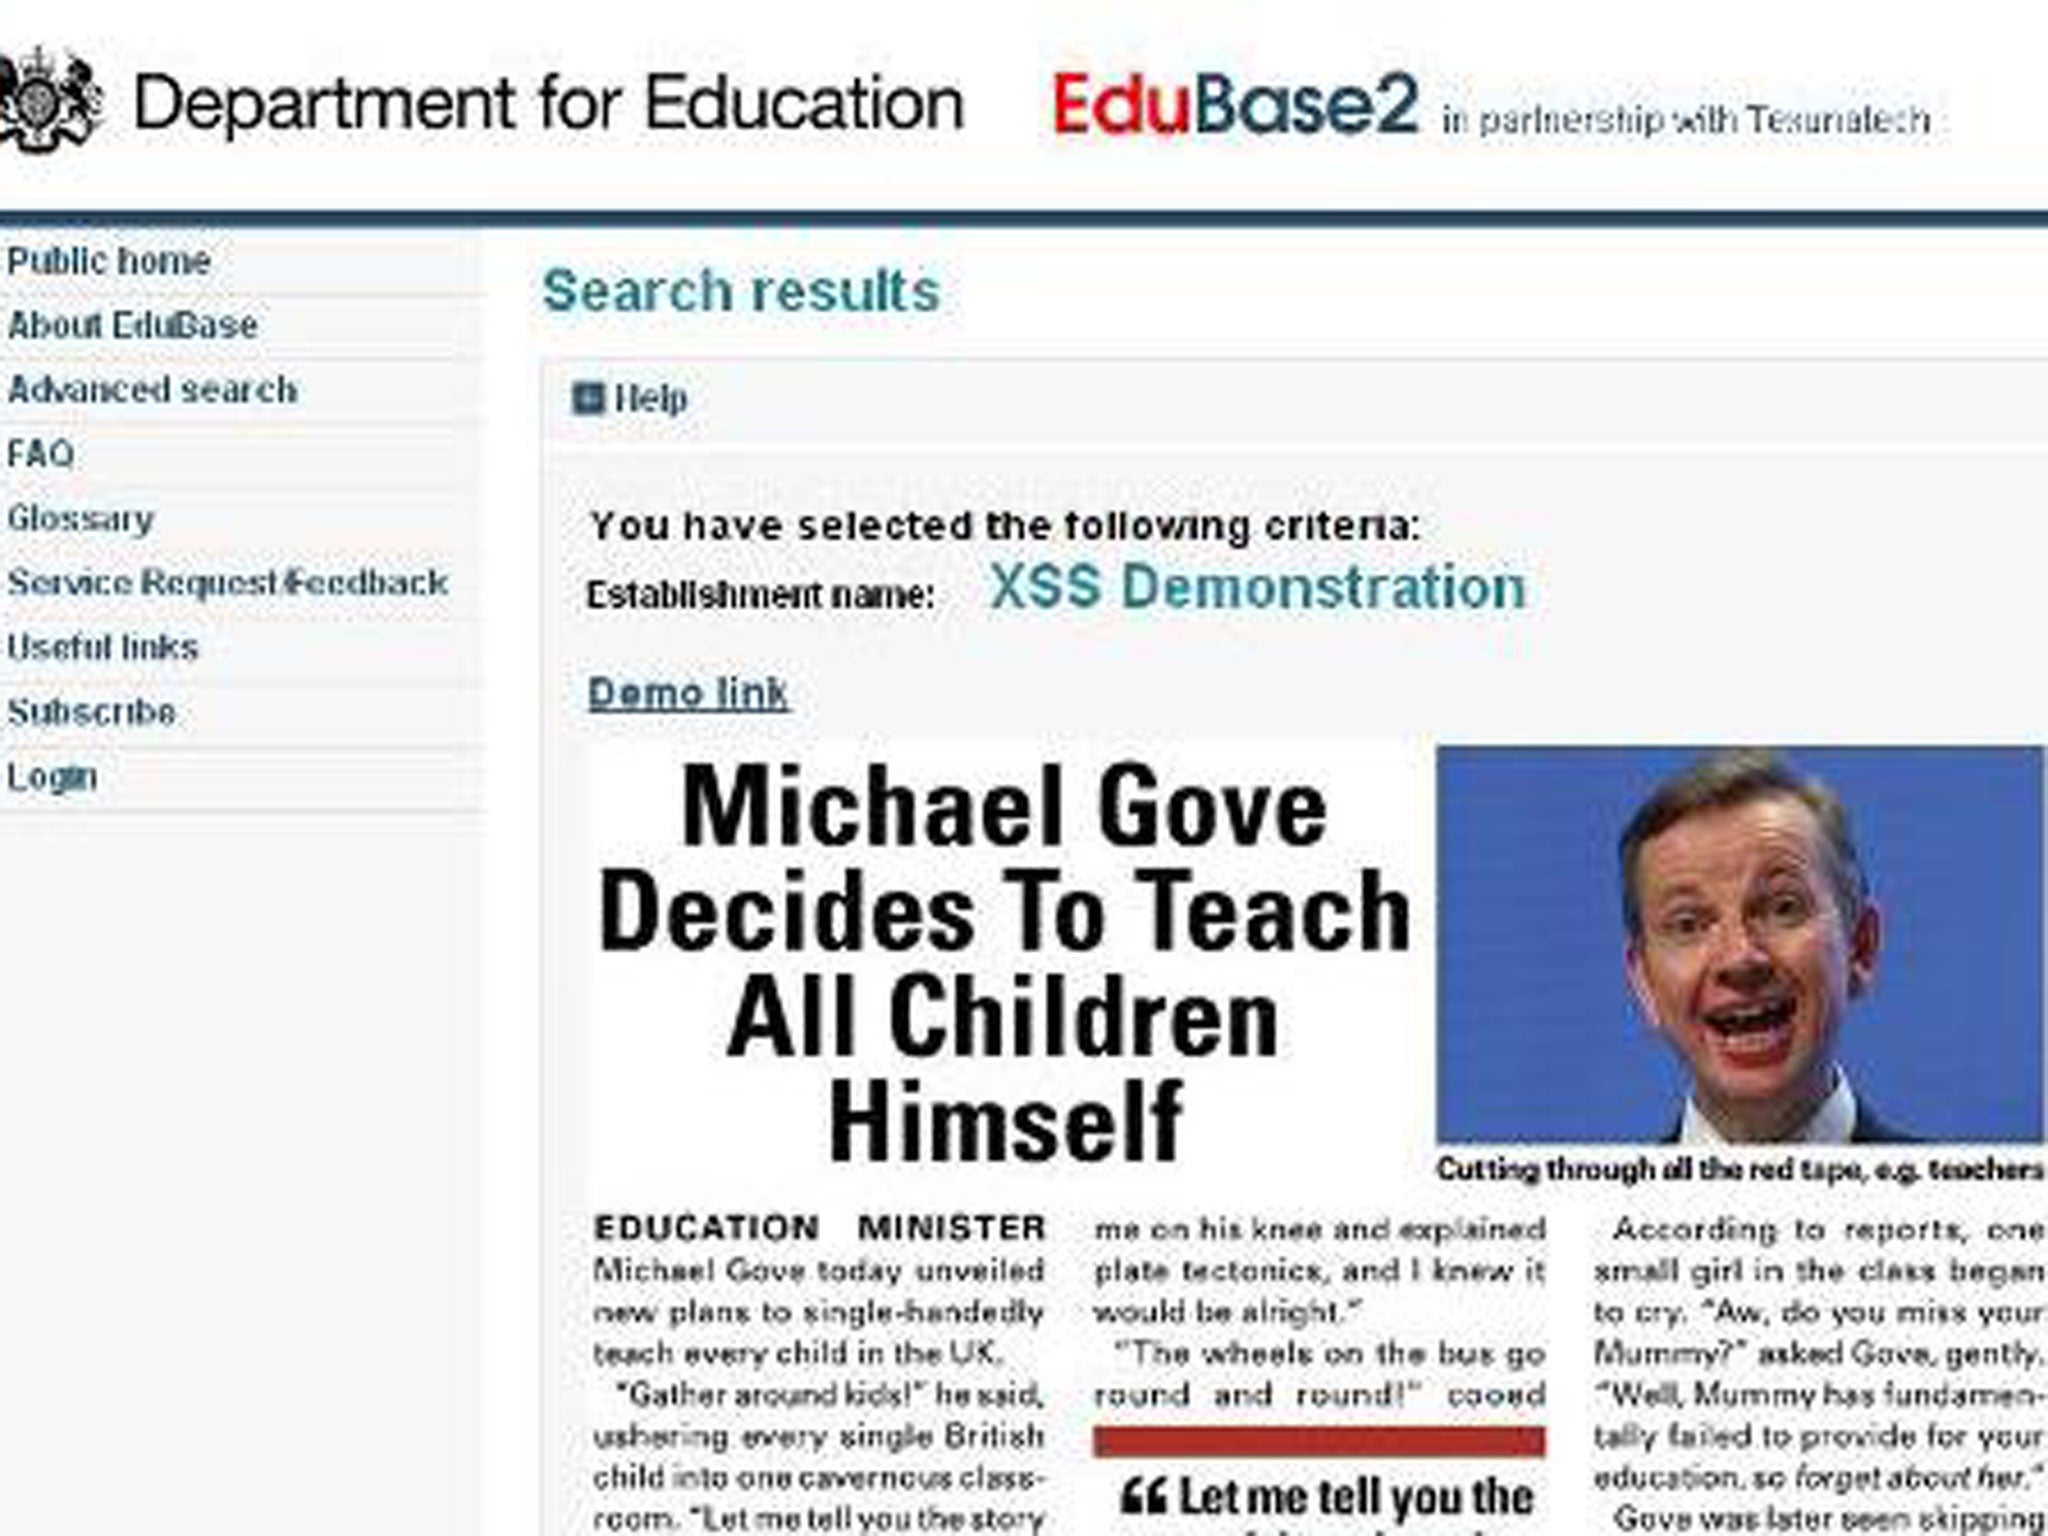 The article that appeared on the Department for Education website for a month before it was deleted